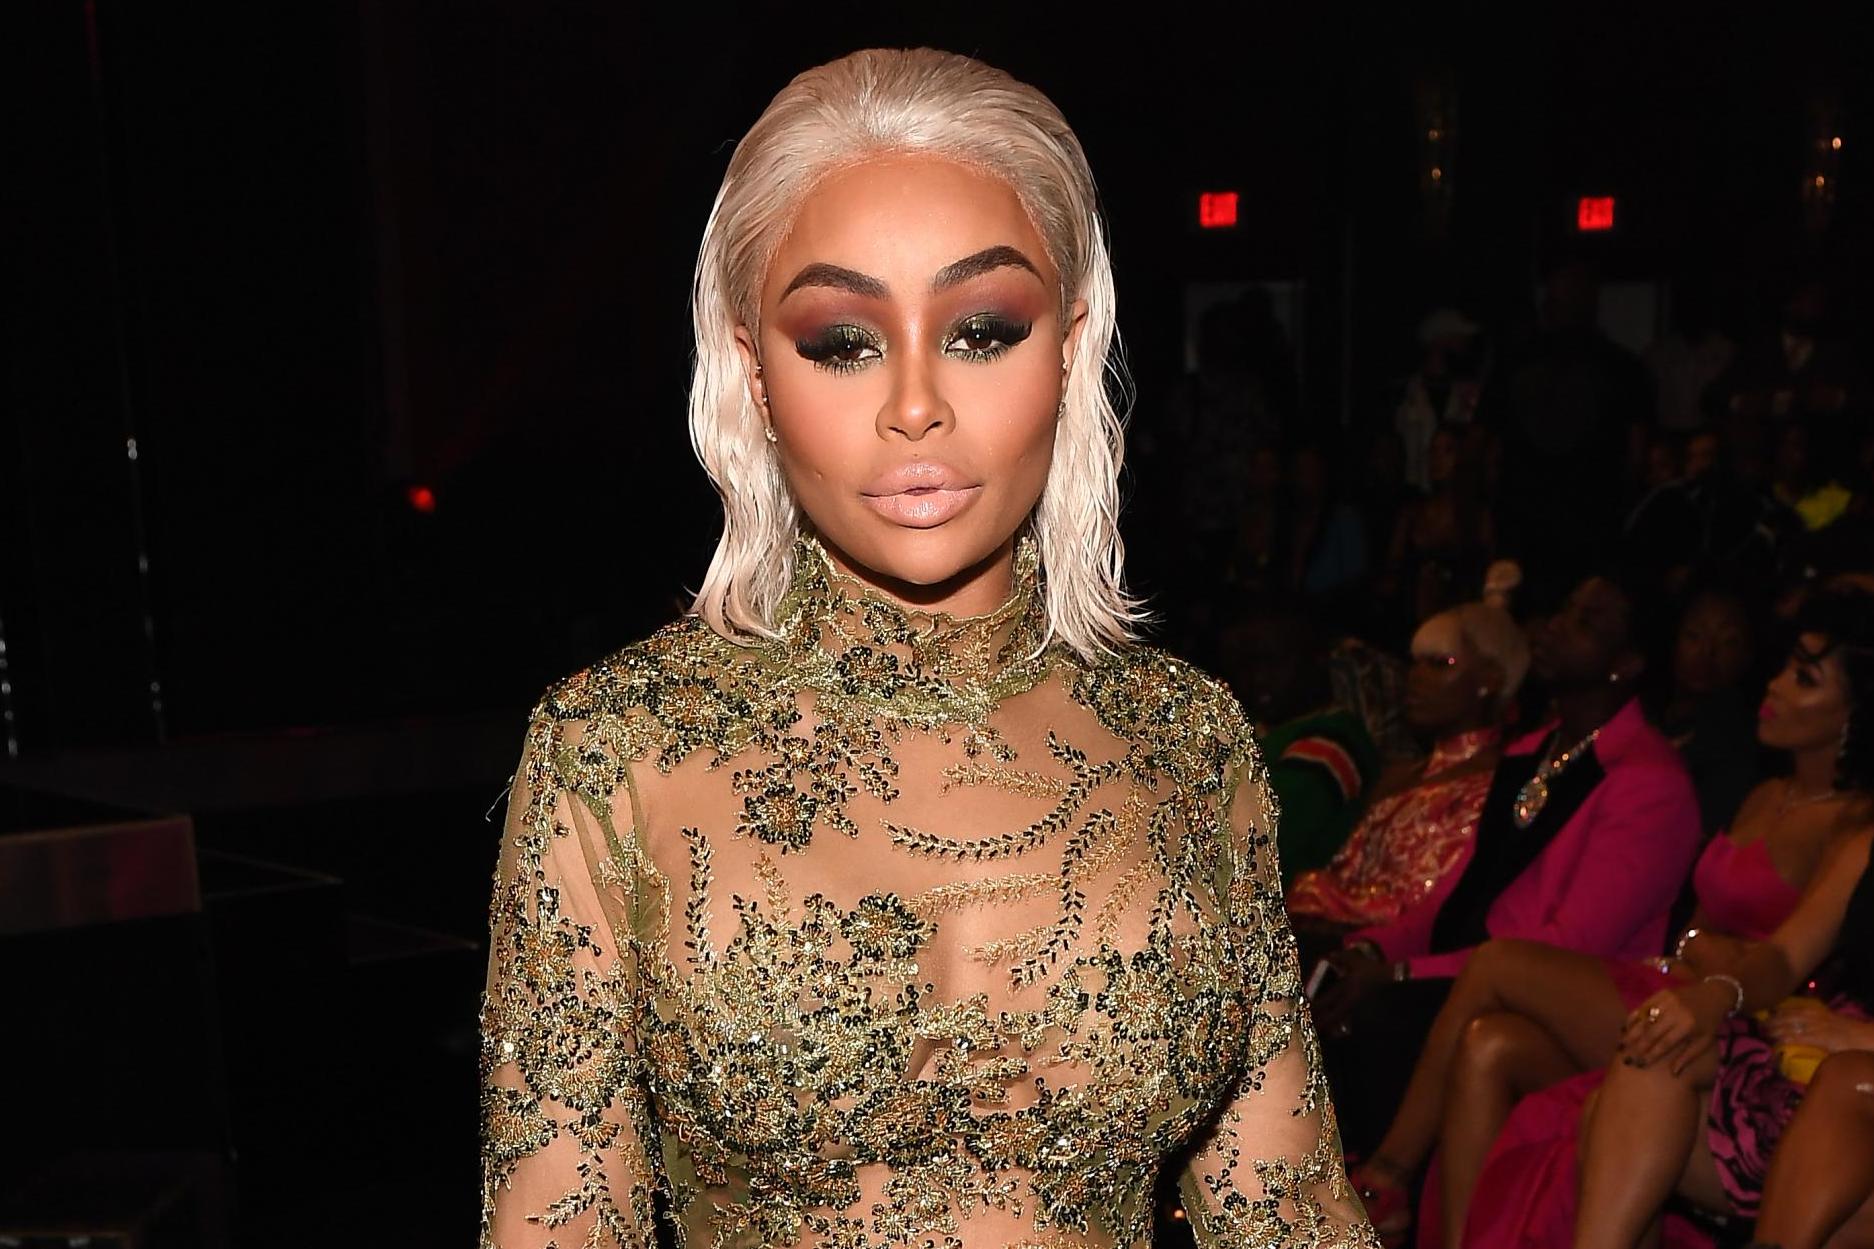 Blac Chyna to Attend Harvard Business School